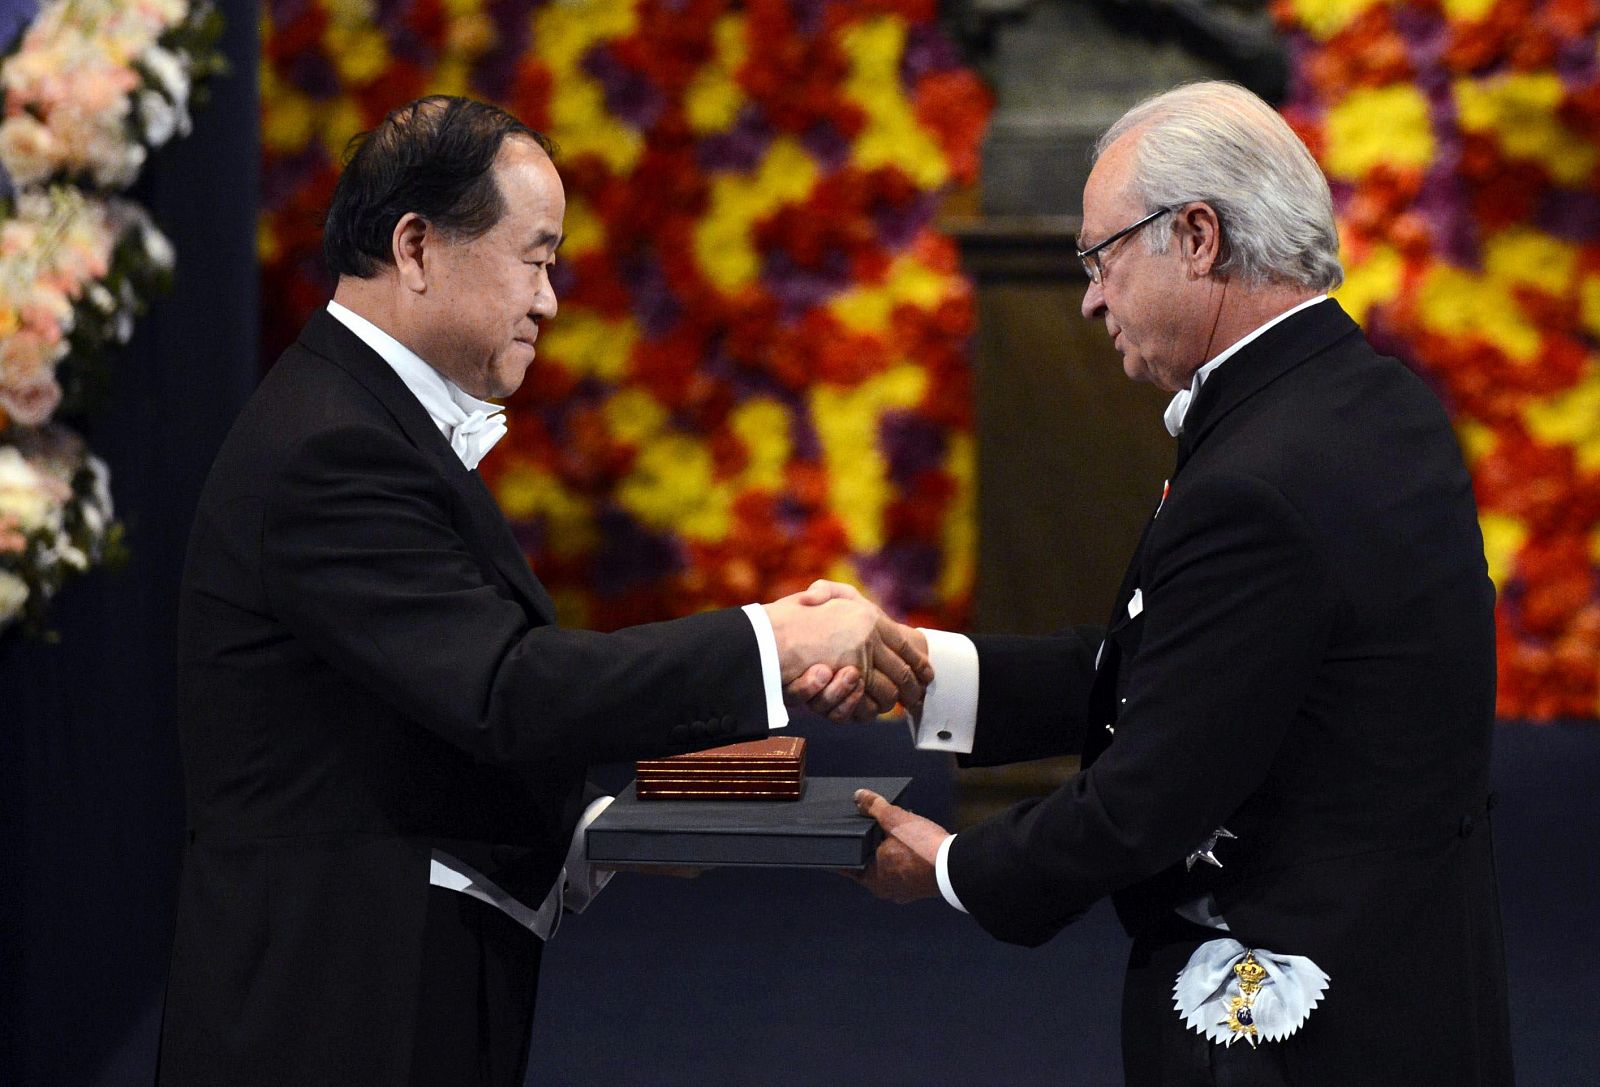 Winner of the 2012 Nobel Prize for Literature Mo Yan of China smiles as he receives his prize from Sweden's King Carl XVI Gustaf during the Nobel Prize award ceremony at the Stockholm Concert Hall in Stockholm